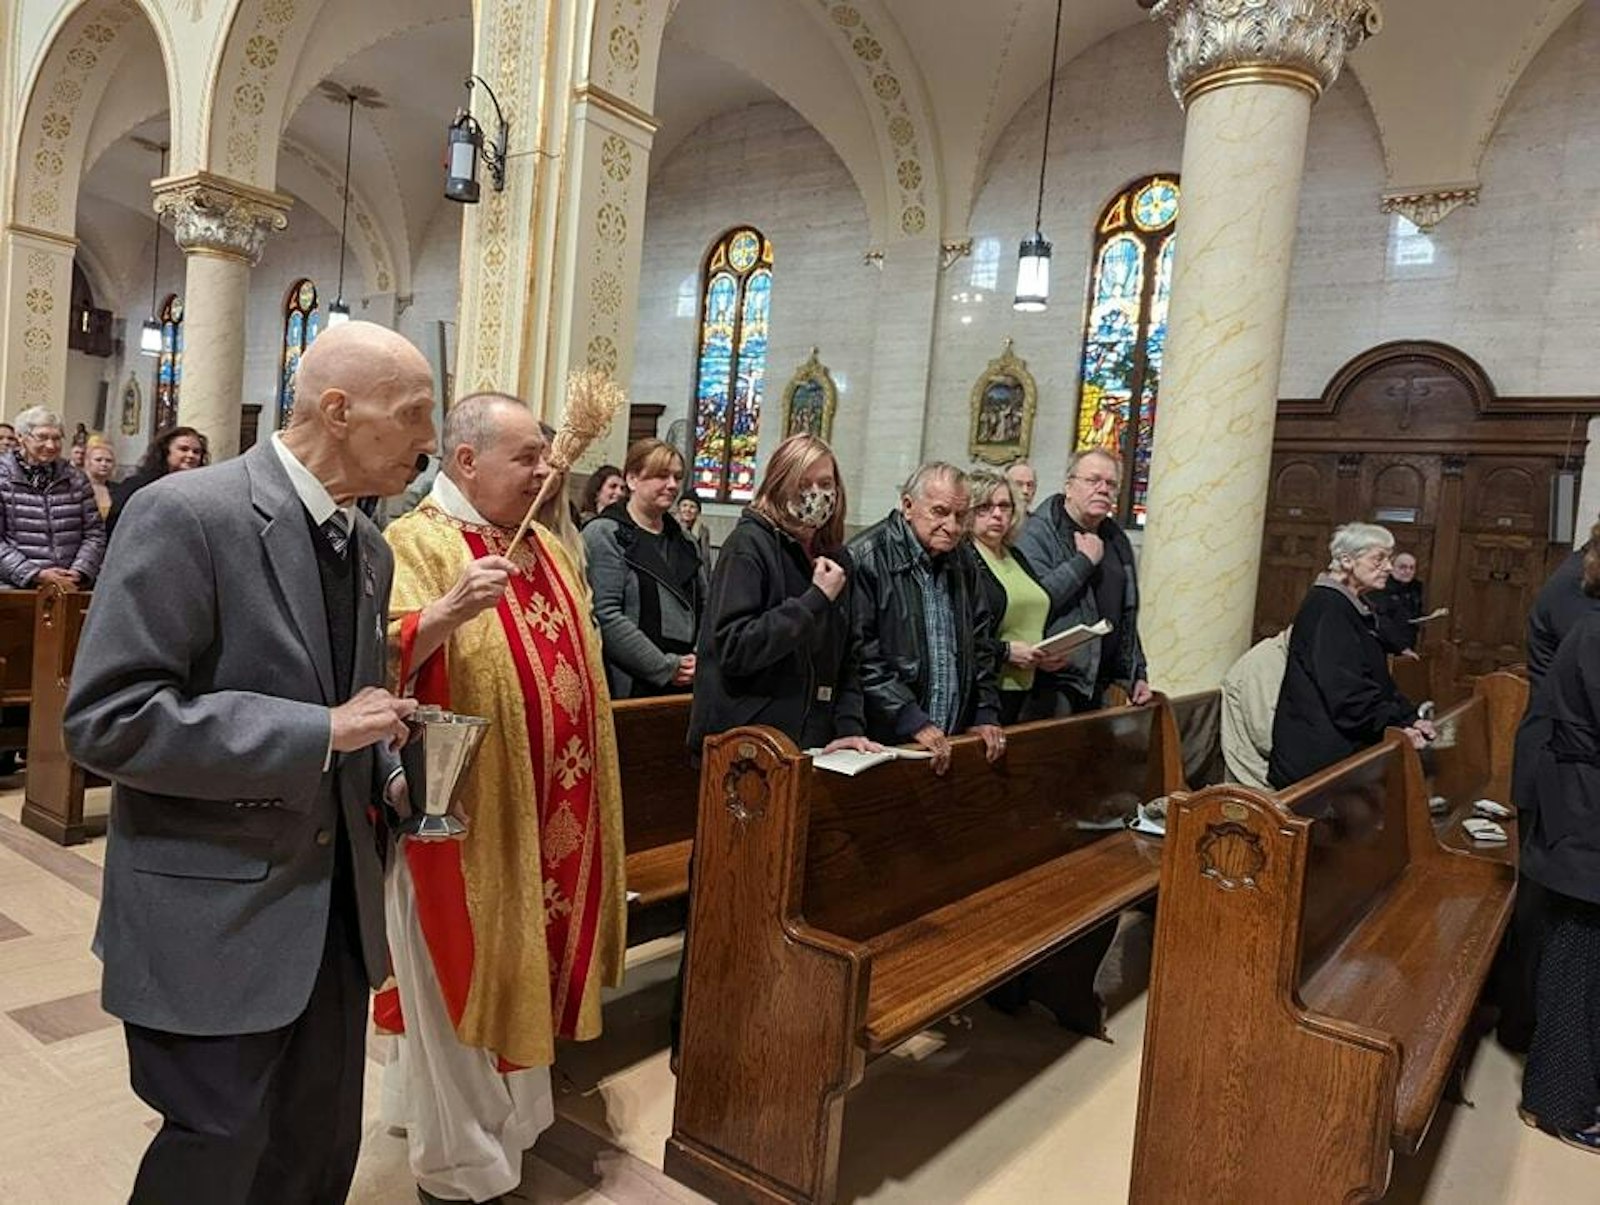 Fr. Janusz Iwan, pictured celebrating Christmas Mass in 2018, served as pastor of St. Hyacinth Parish from 2006 to 2023. Fr. Iwan died Jan. 5. He was 74. (Courtesy of St. Hyacinth Parish)